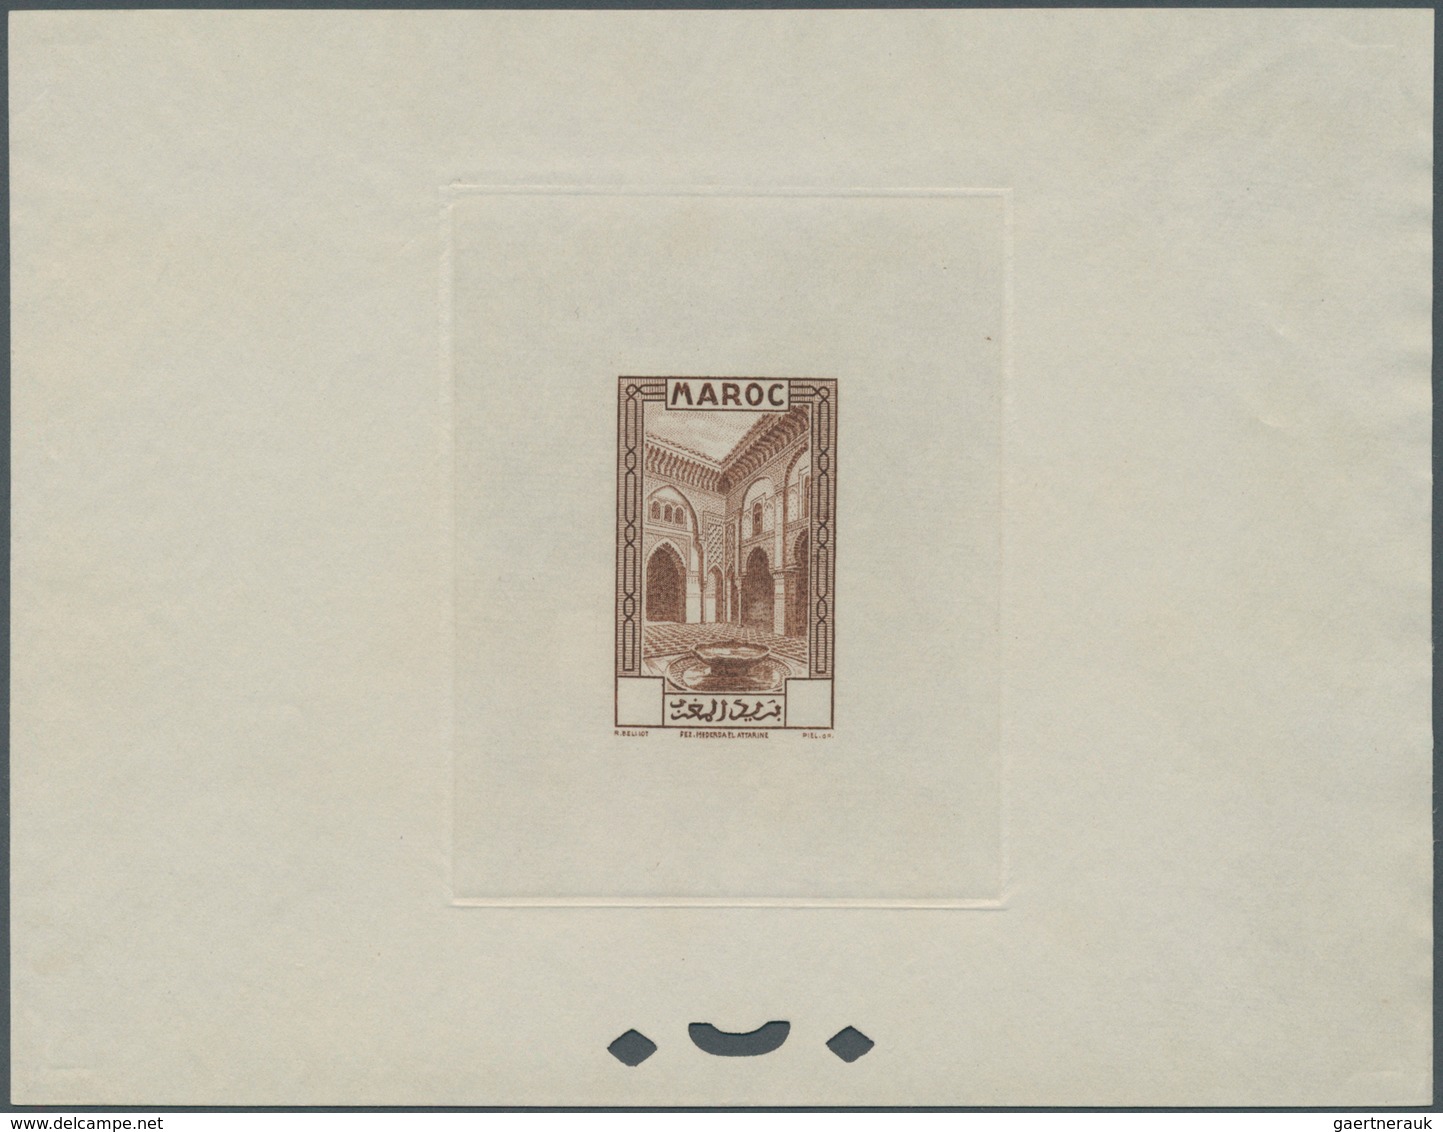 12185 Marokko: 1933, Definitives "Views of Morocco", 1c. to 20fr., complete set of 24 values, epreuve with